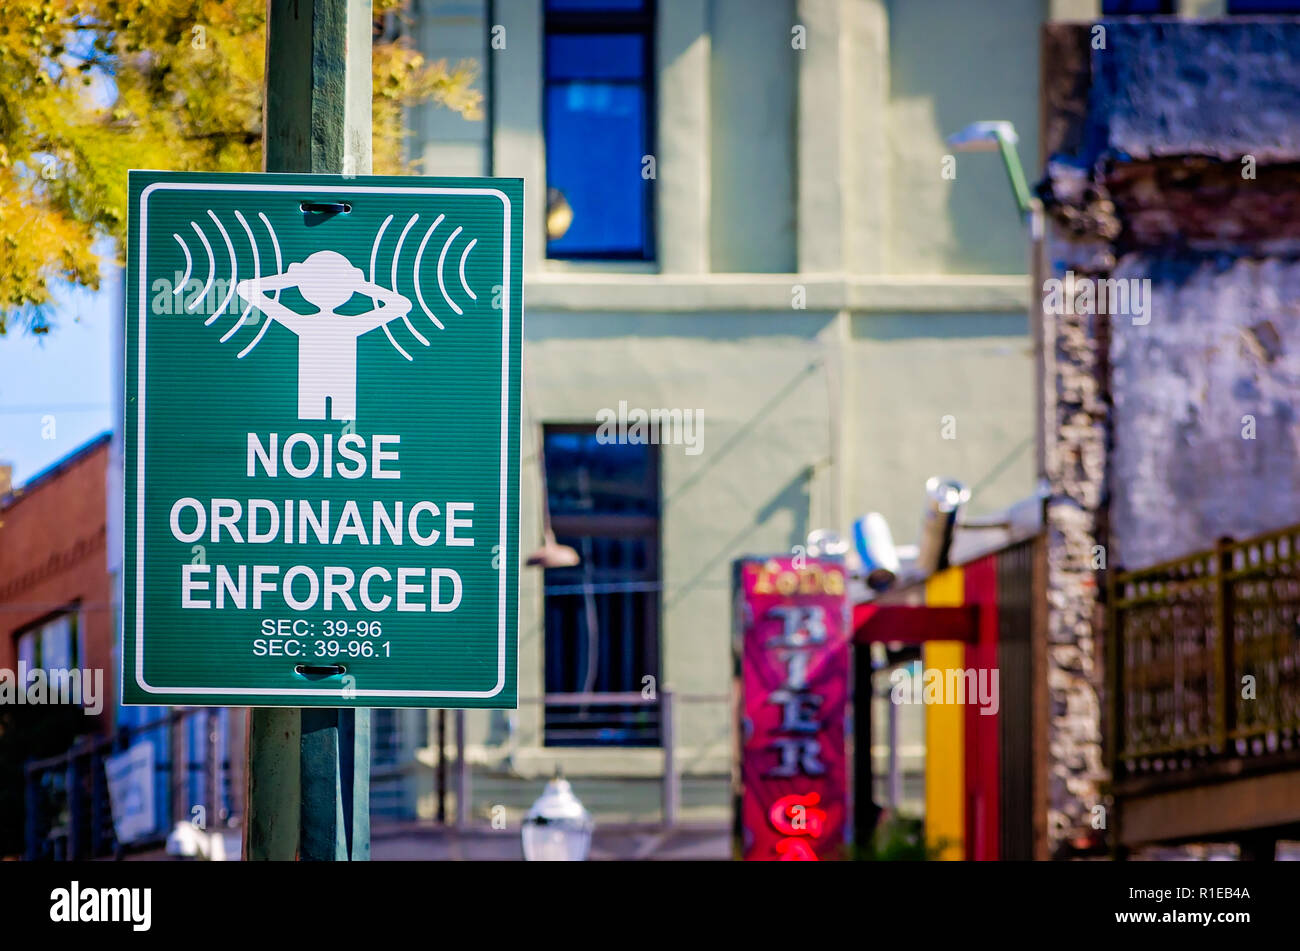 A noise ordinance enforcement sign is pictured on Dauphin Street, Nov. 3, 2018, in Mobile, Alabama. Stock Photo